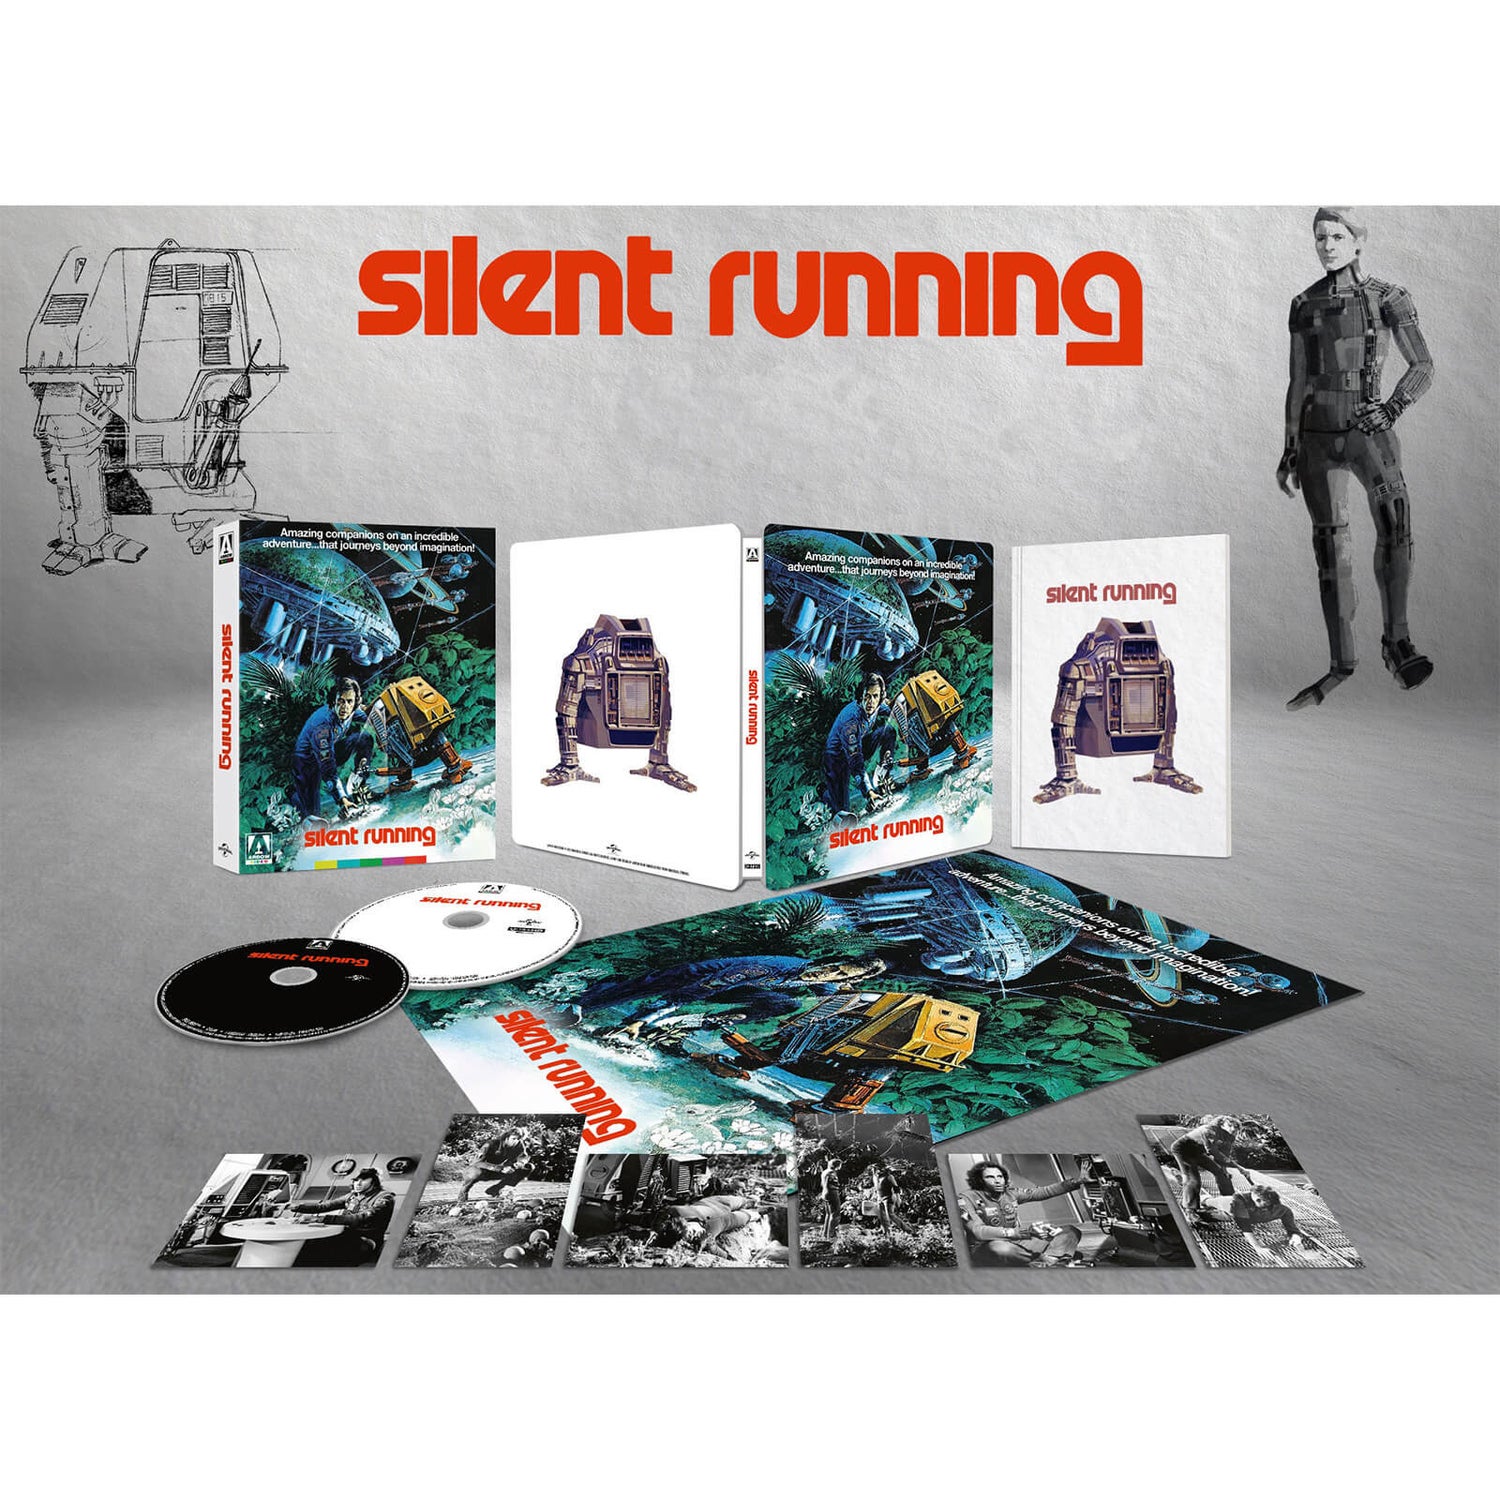 Silent Running Deluxe Limited Edition Zavvi Exclusive 4K Ultra HD Steelbook (includes Blu-ray)